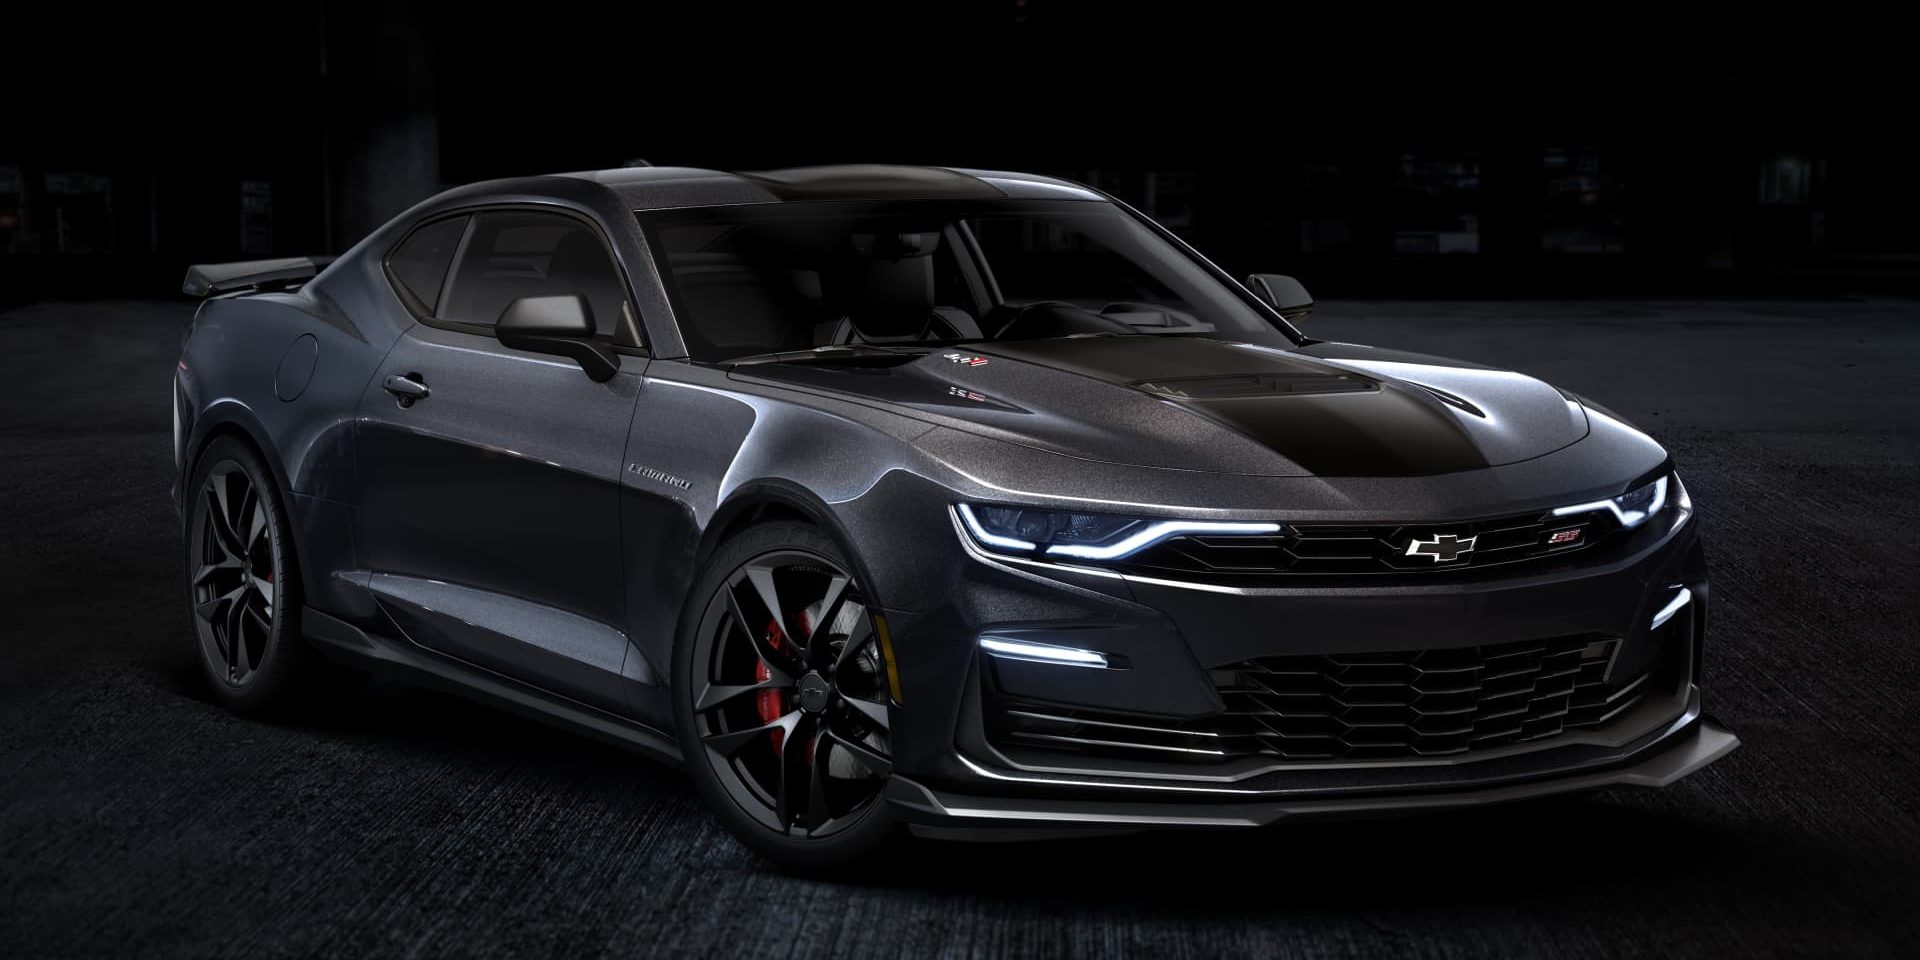 The final Chevrolet Camaro coupe revealed